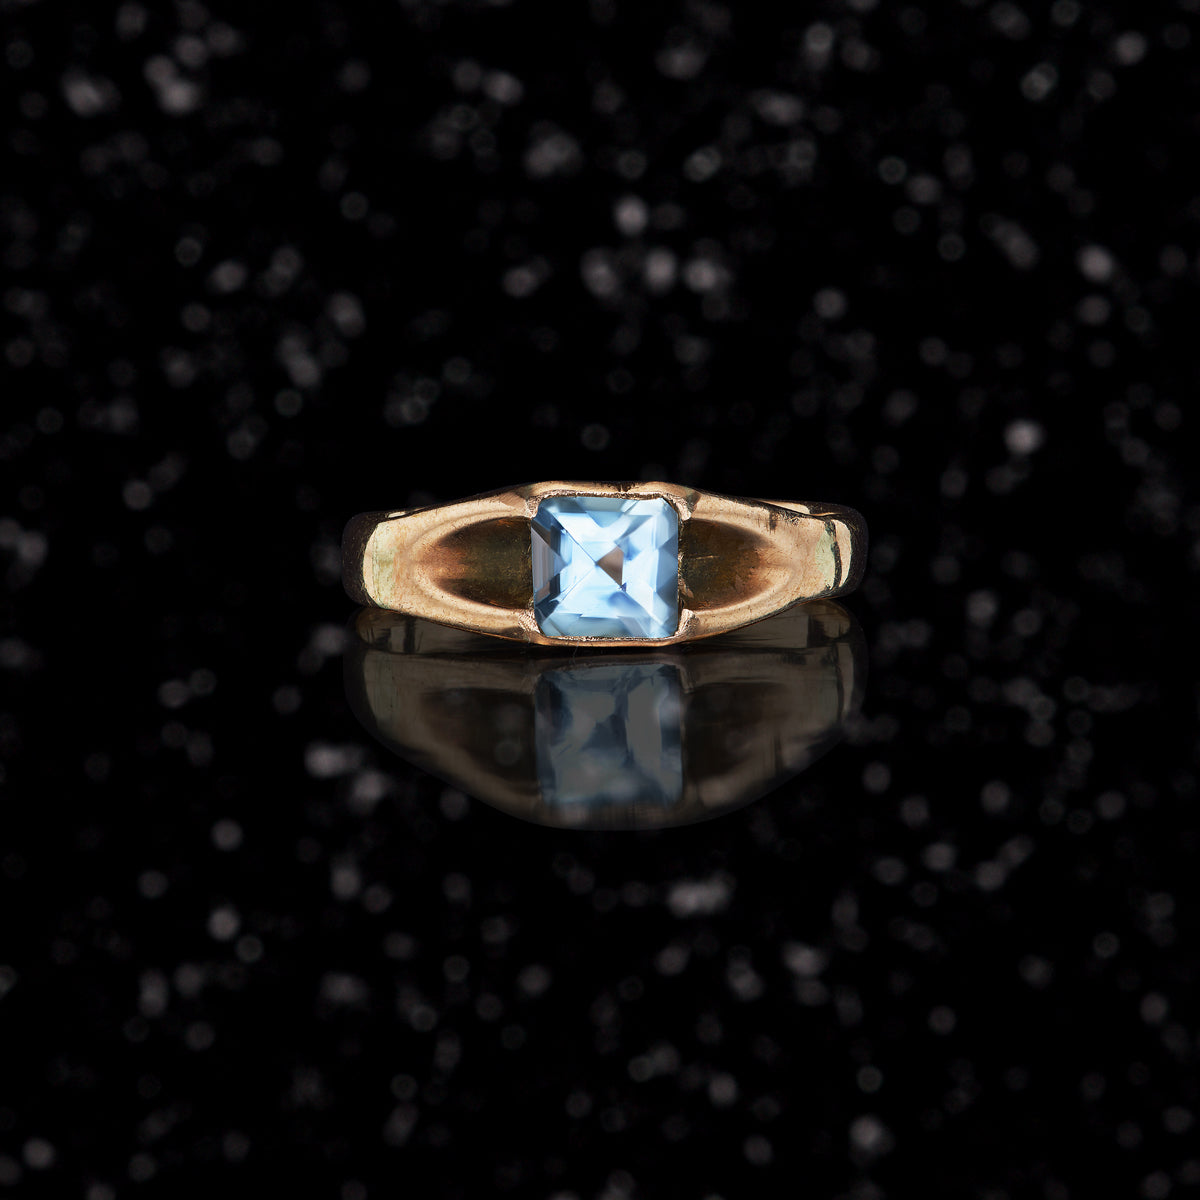 THE BABY BLUE RING